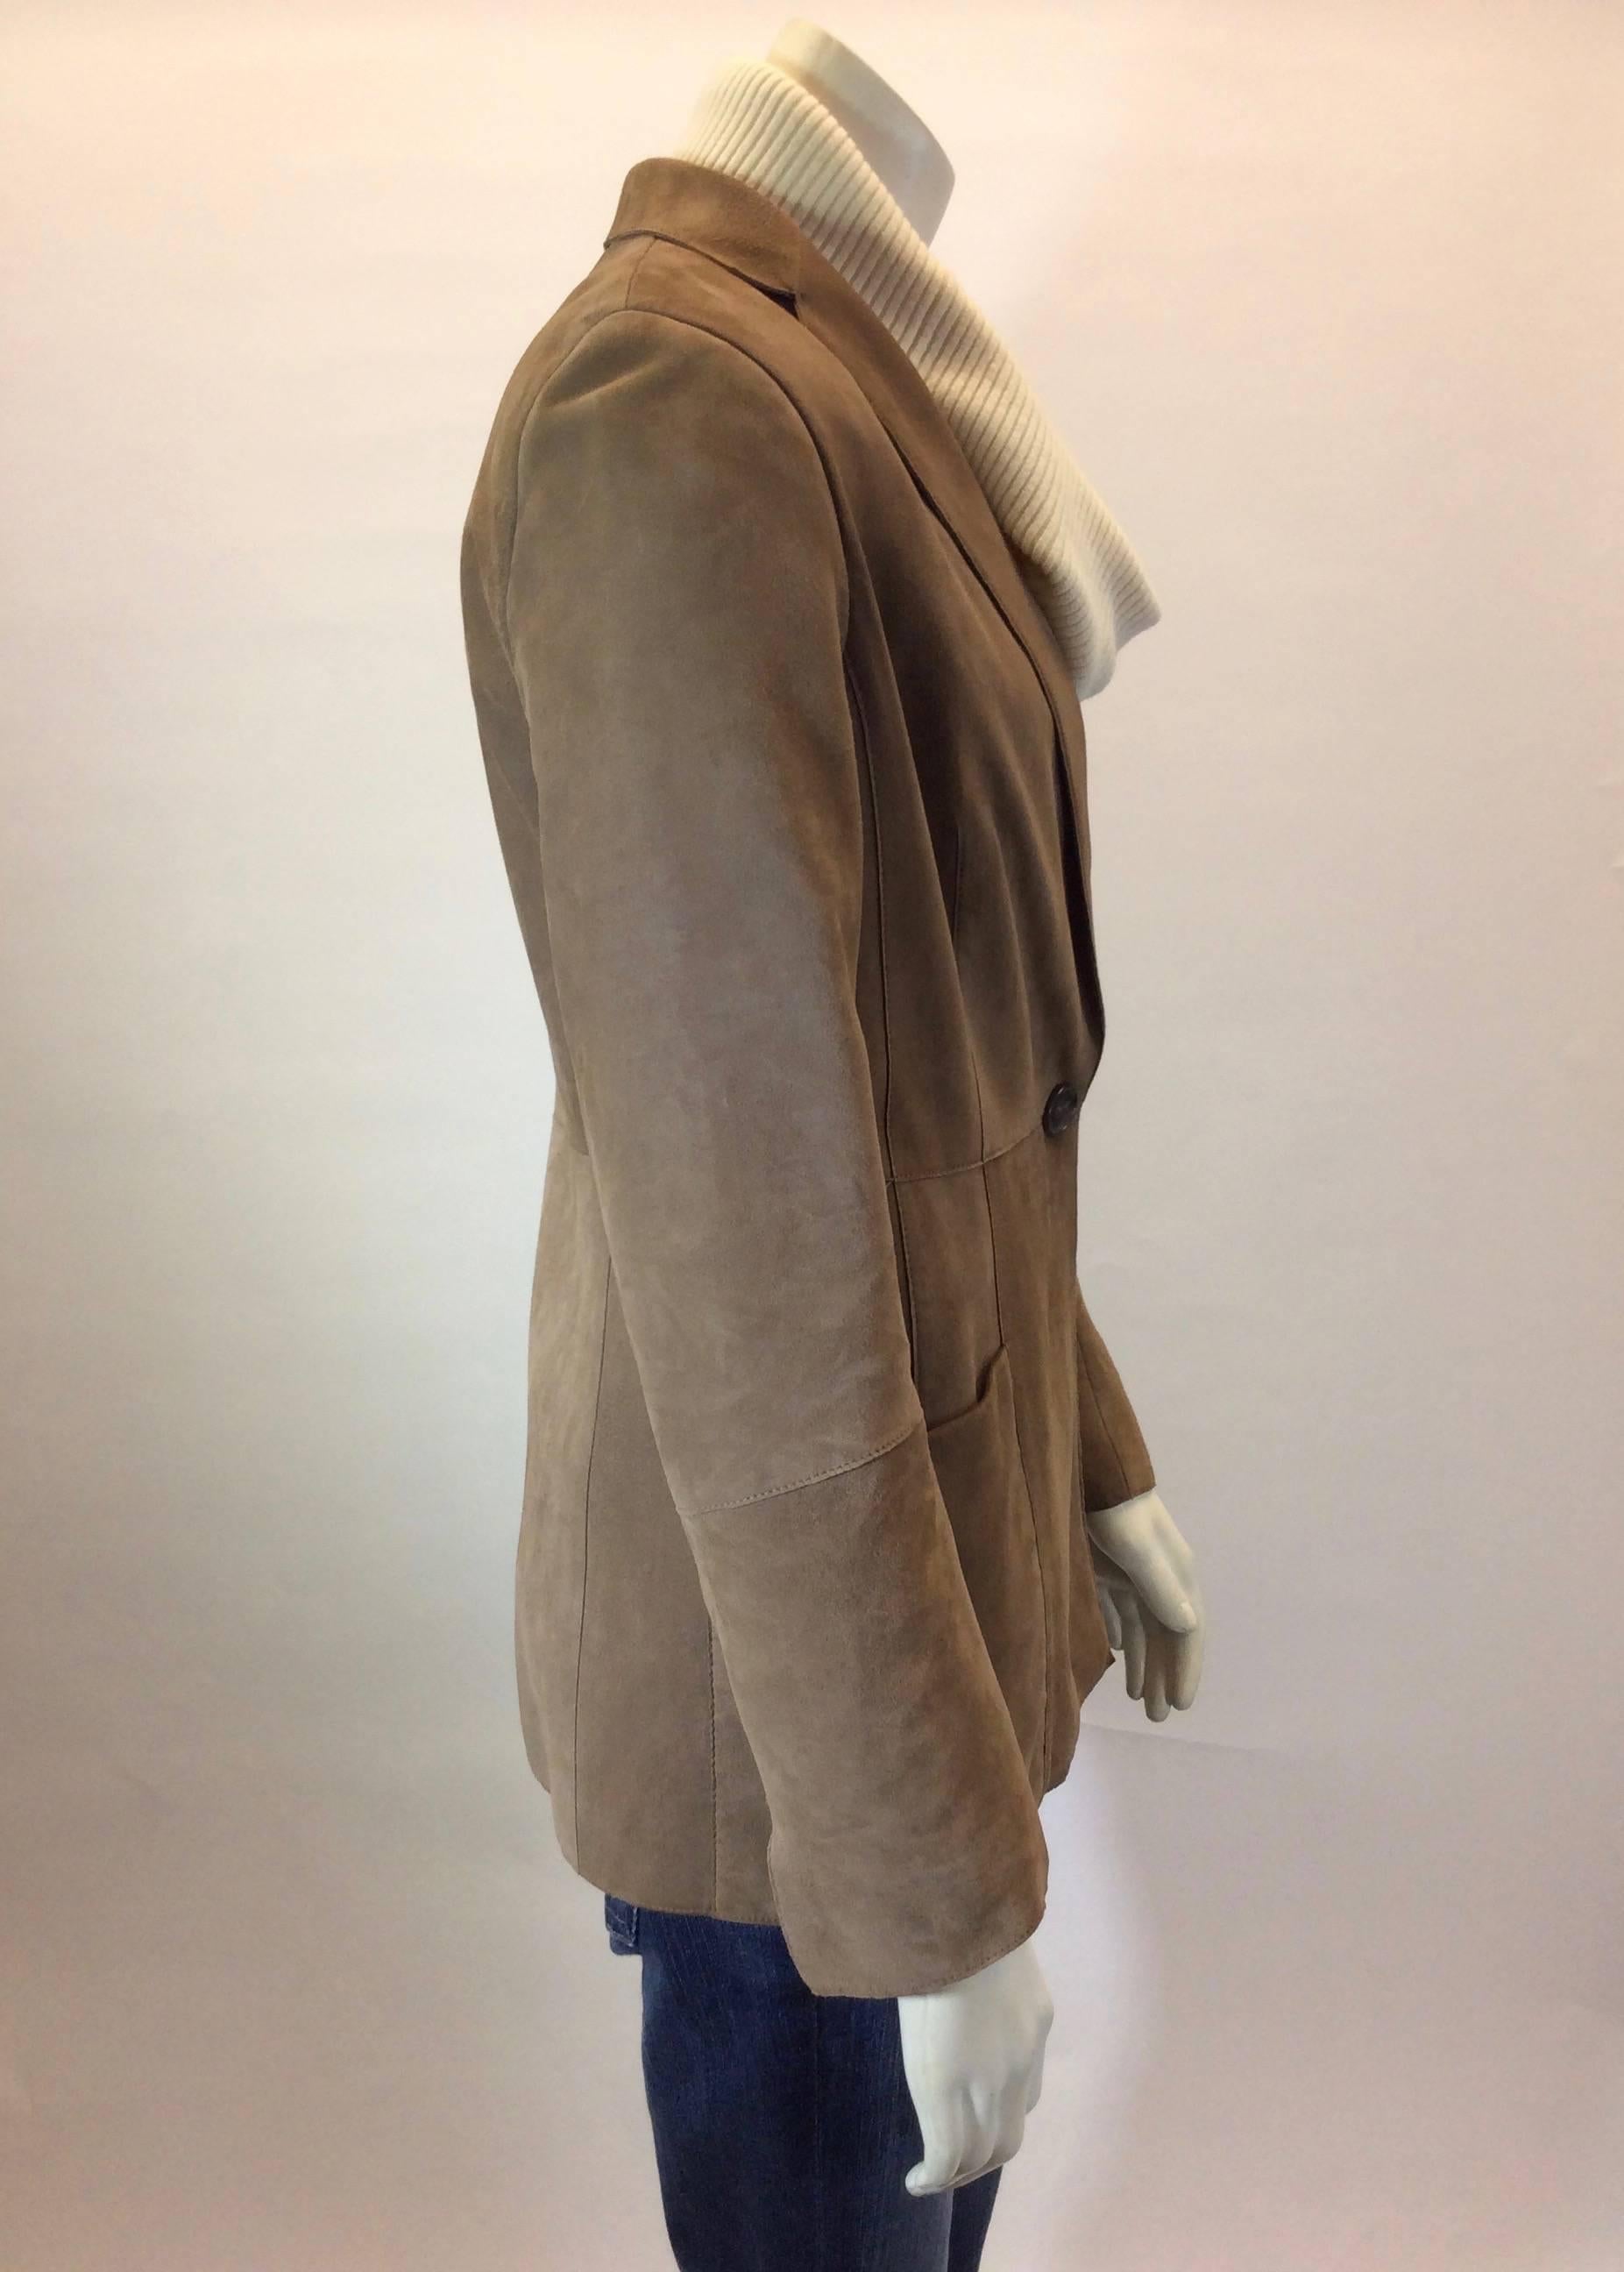 Akris Toffee Brown Suede Single Button Blazer In Excellent Condition For Sale In Narberth, PA